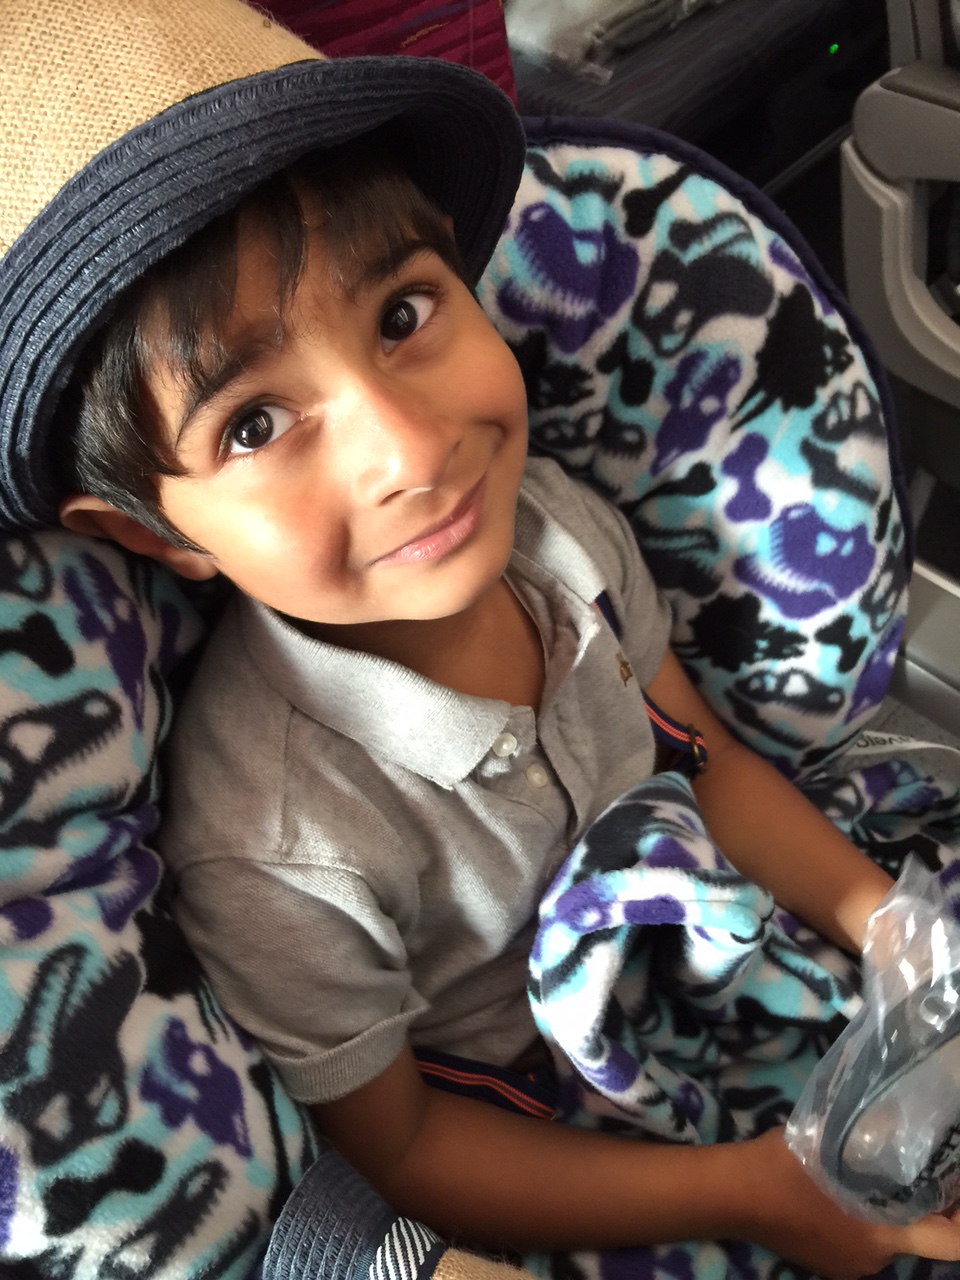 Review: Travel Snug Airline Seat Cushion For Kids